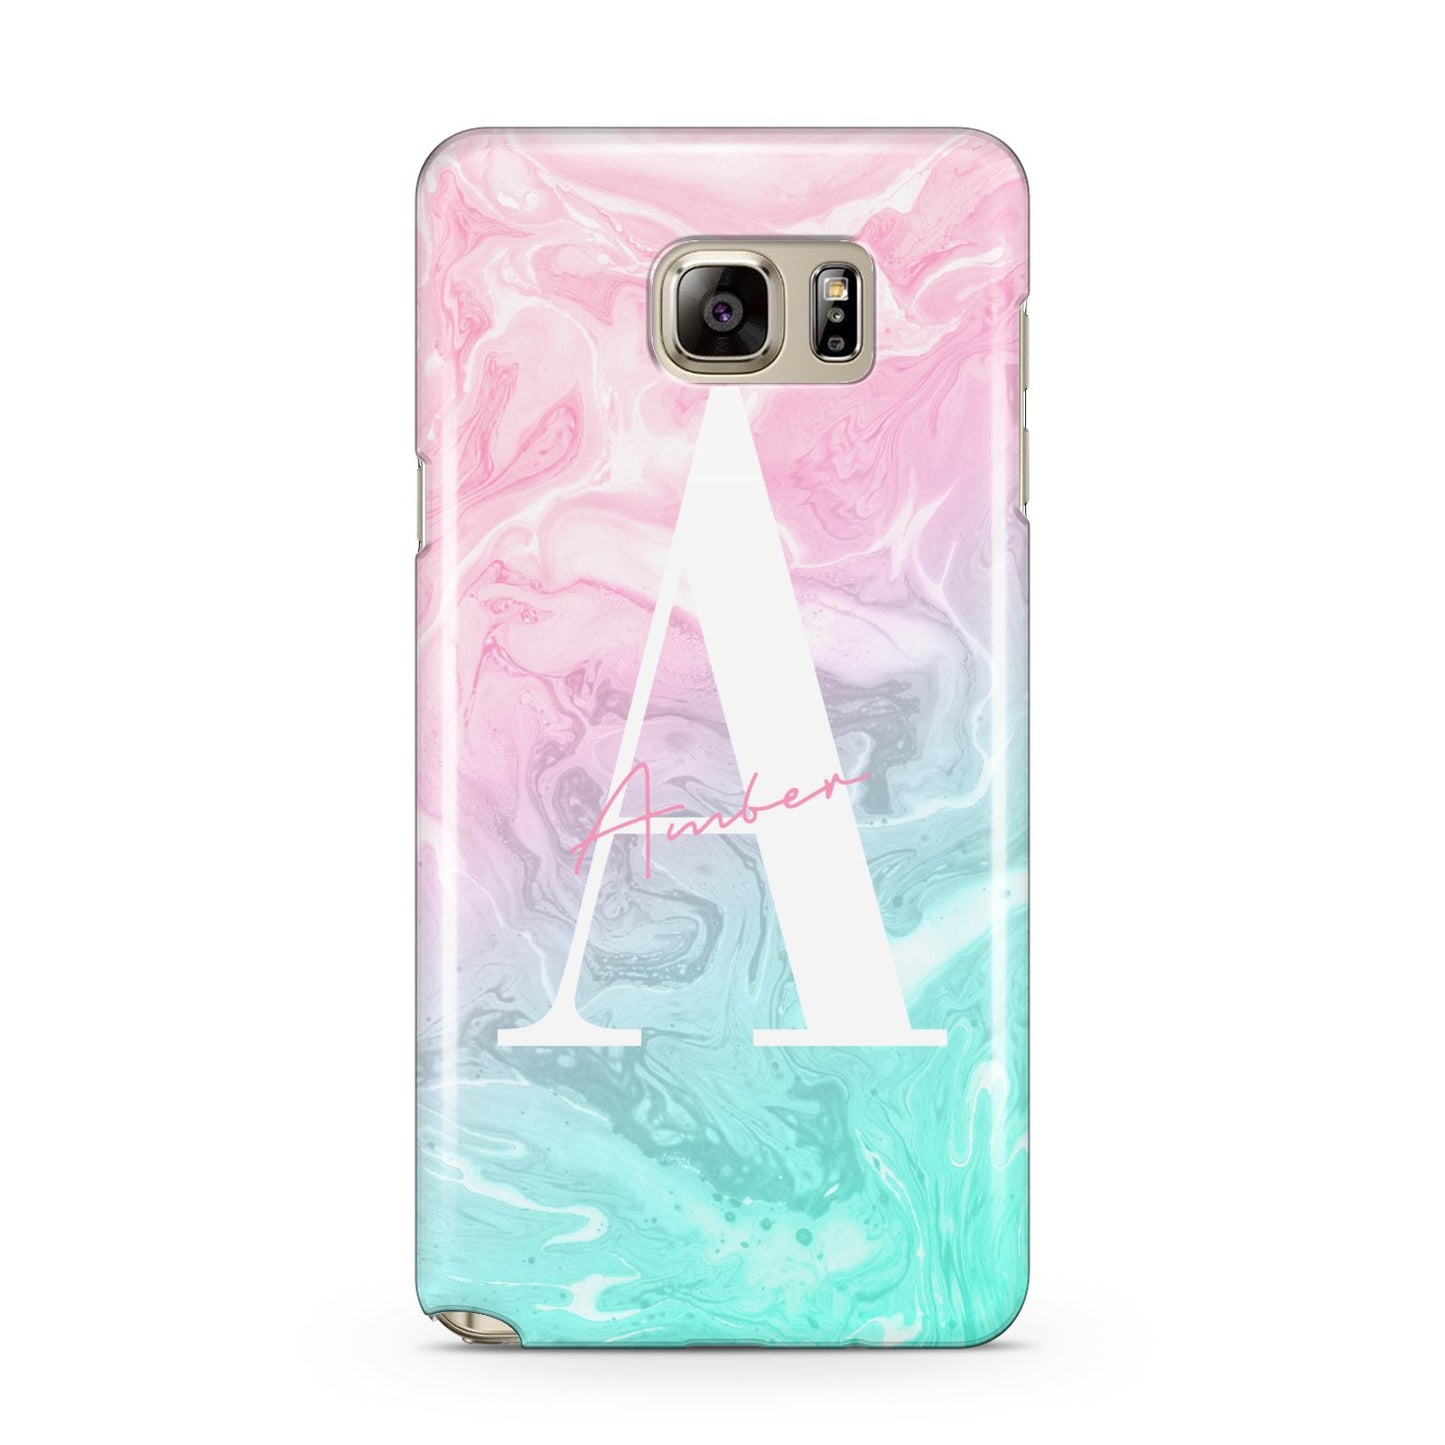 Monogrammed Pink Turquoise Pastel Marble Samsung Galaxy Note 5 Case